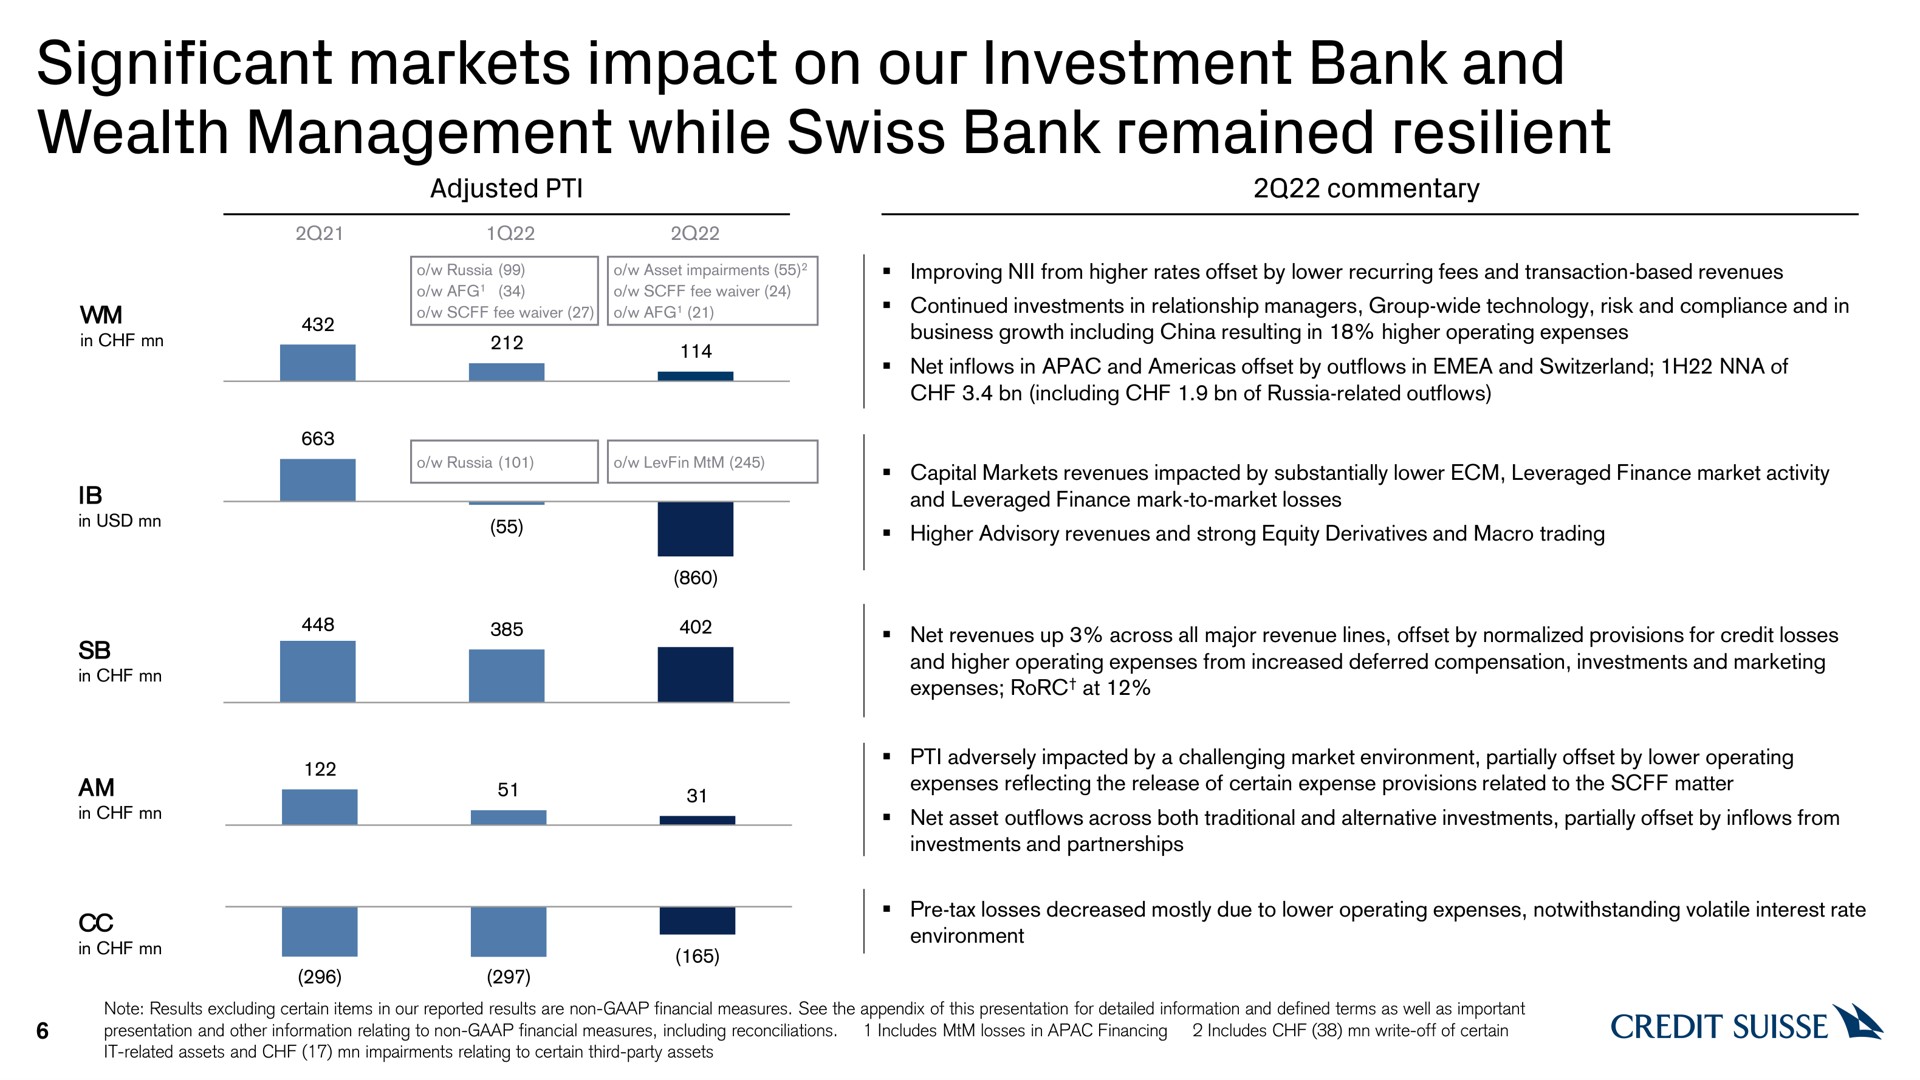 significant markets impact on our investment bank and wealth management while swiss bank remained resilient | Credit Suisse